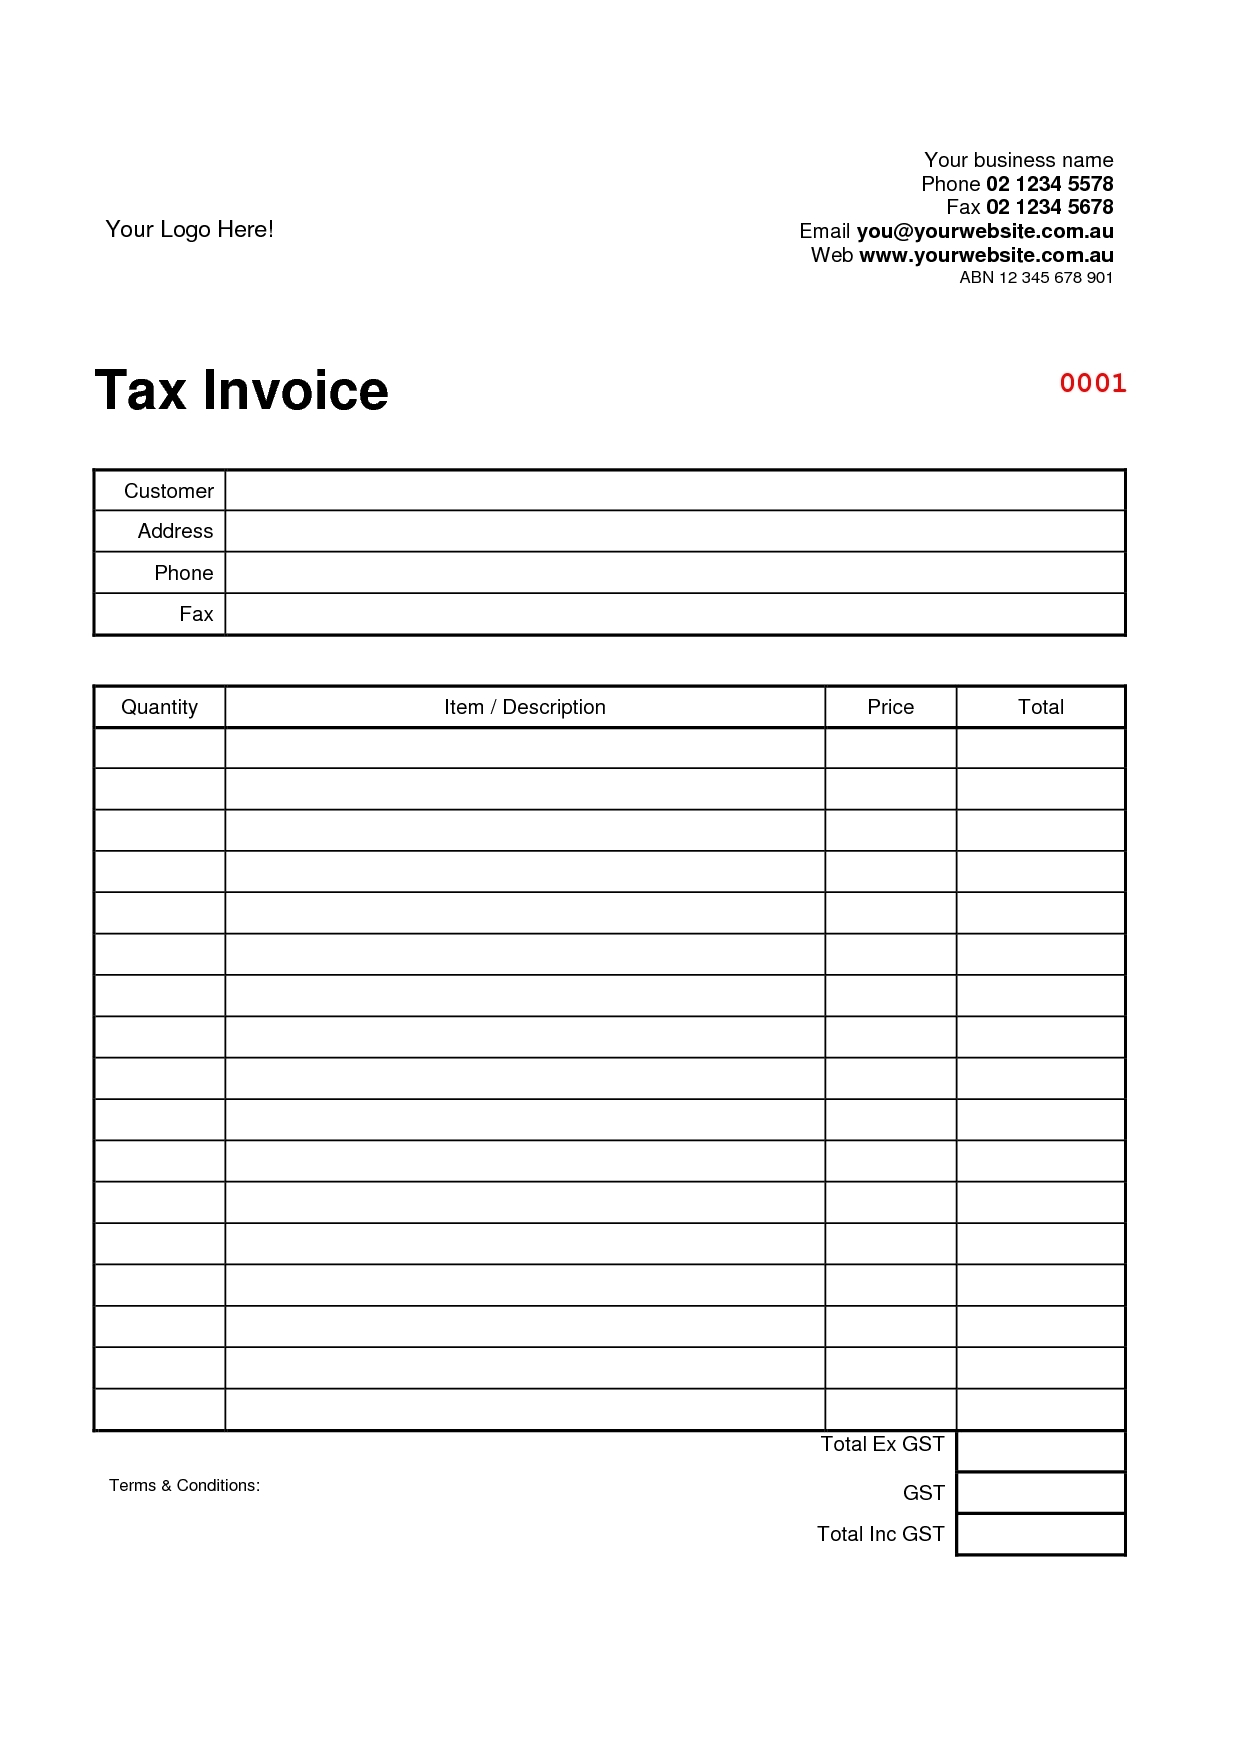 tax invoice generator tax invoice template excel free business format word 294476 v hsbcu 1240 X 1754